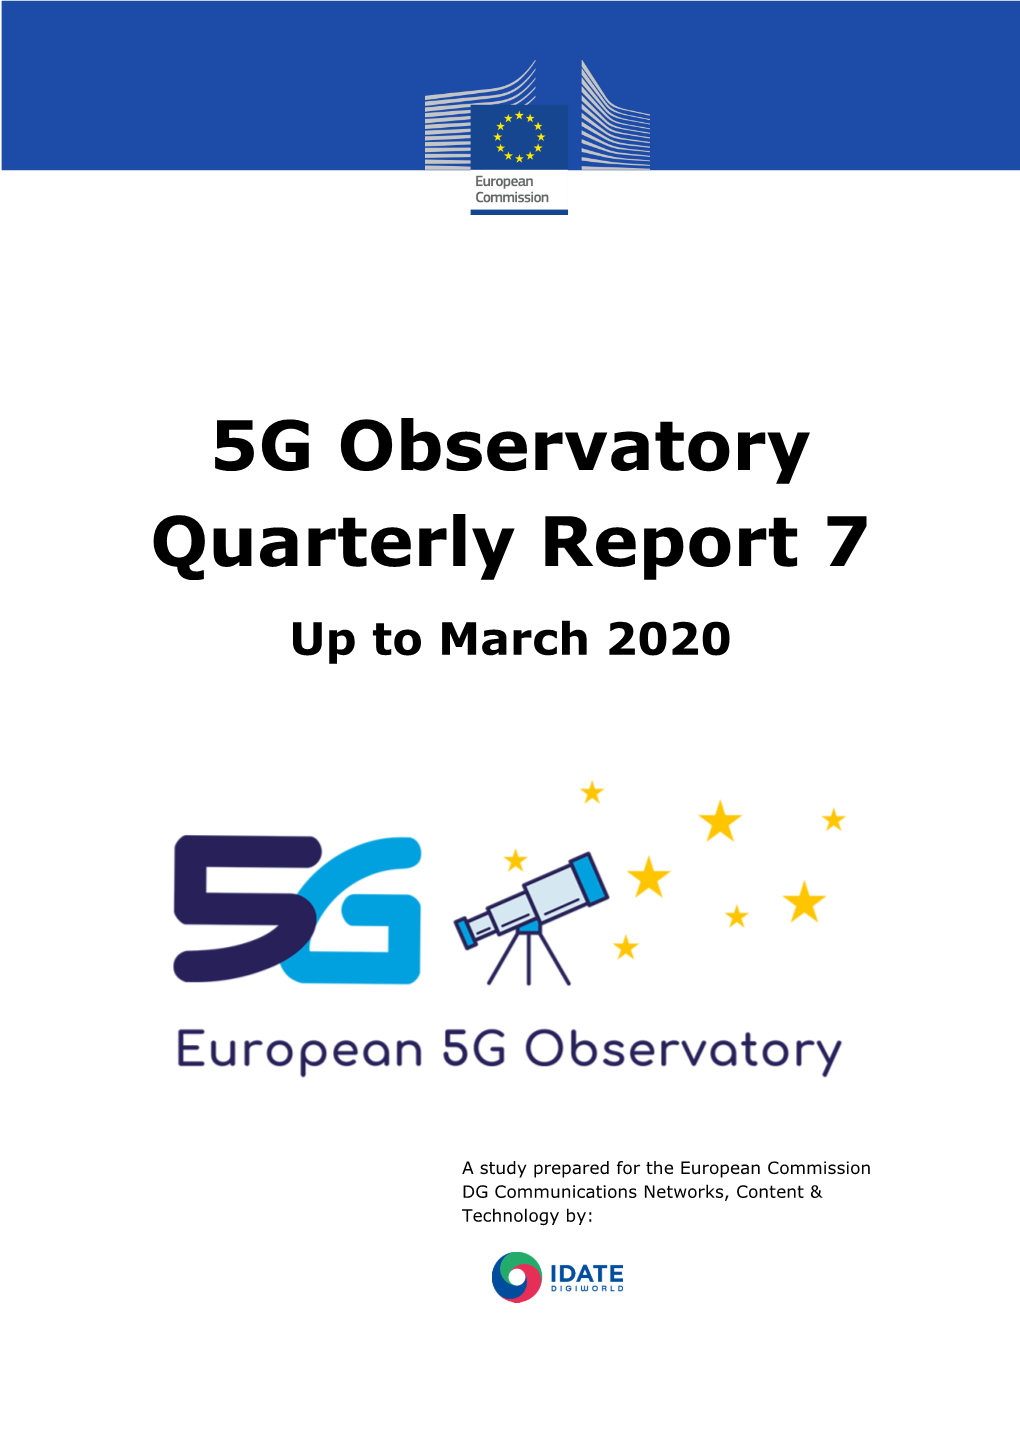 5G Observatory Quarterly Report 7 up to March 2020